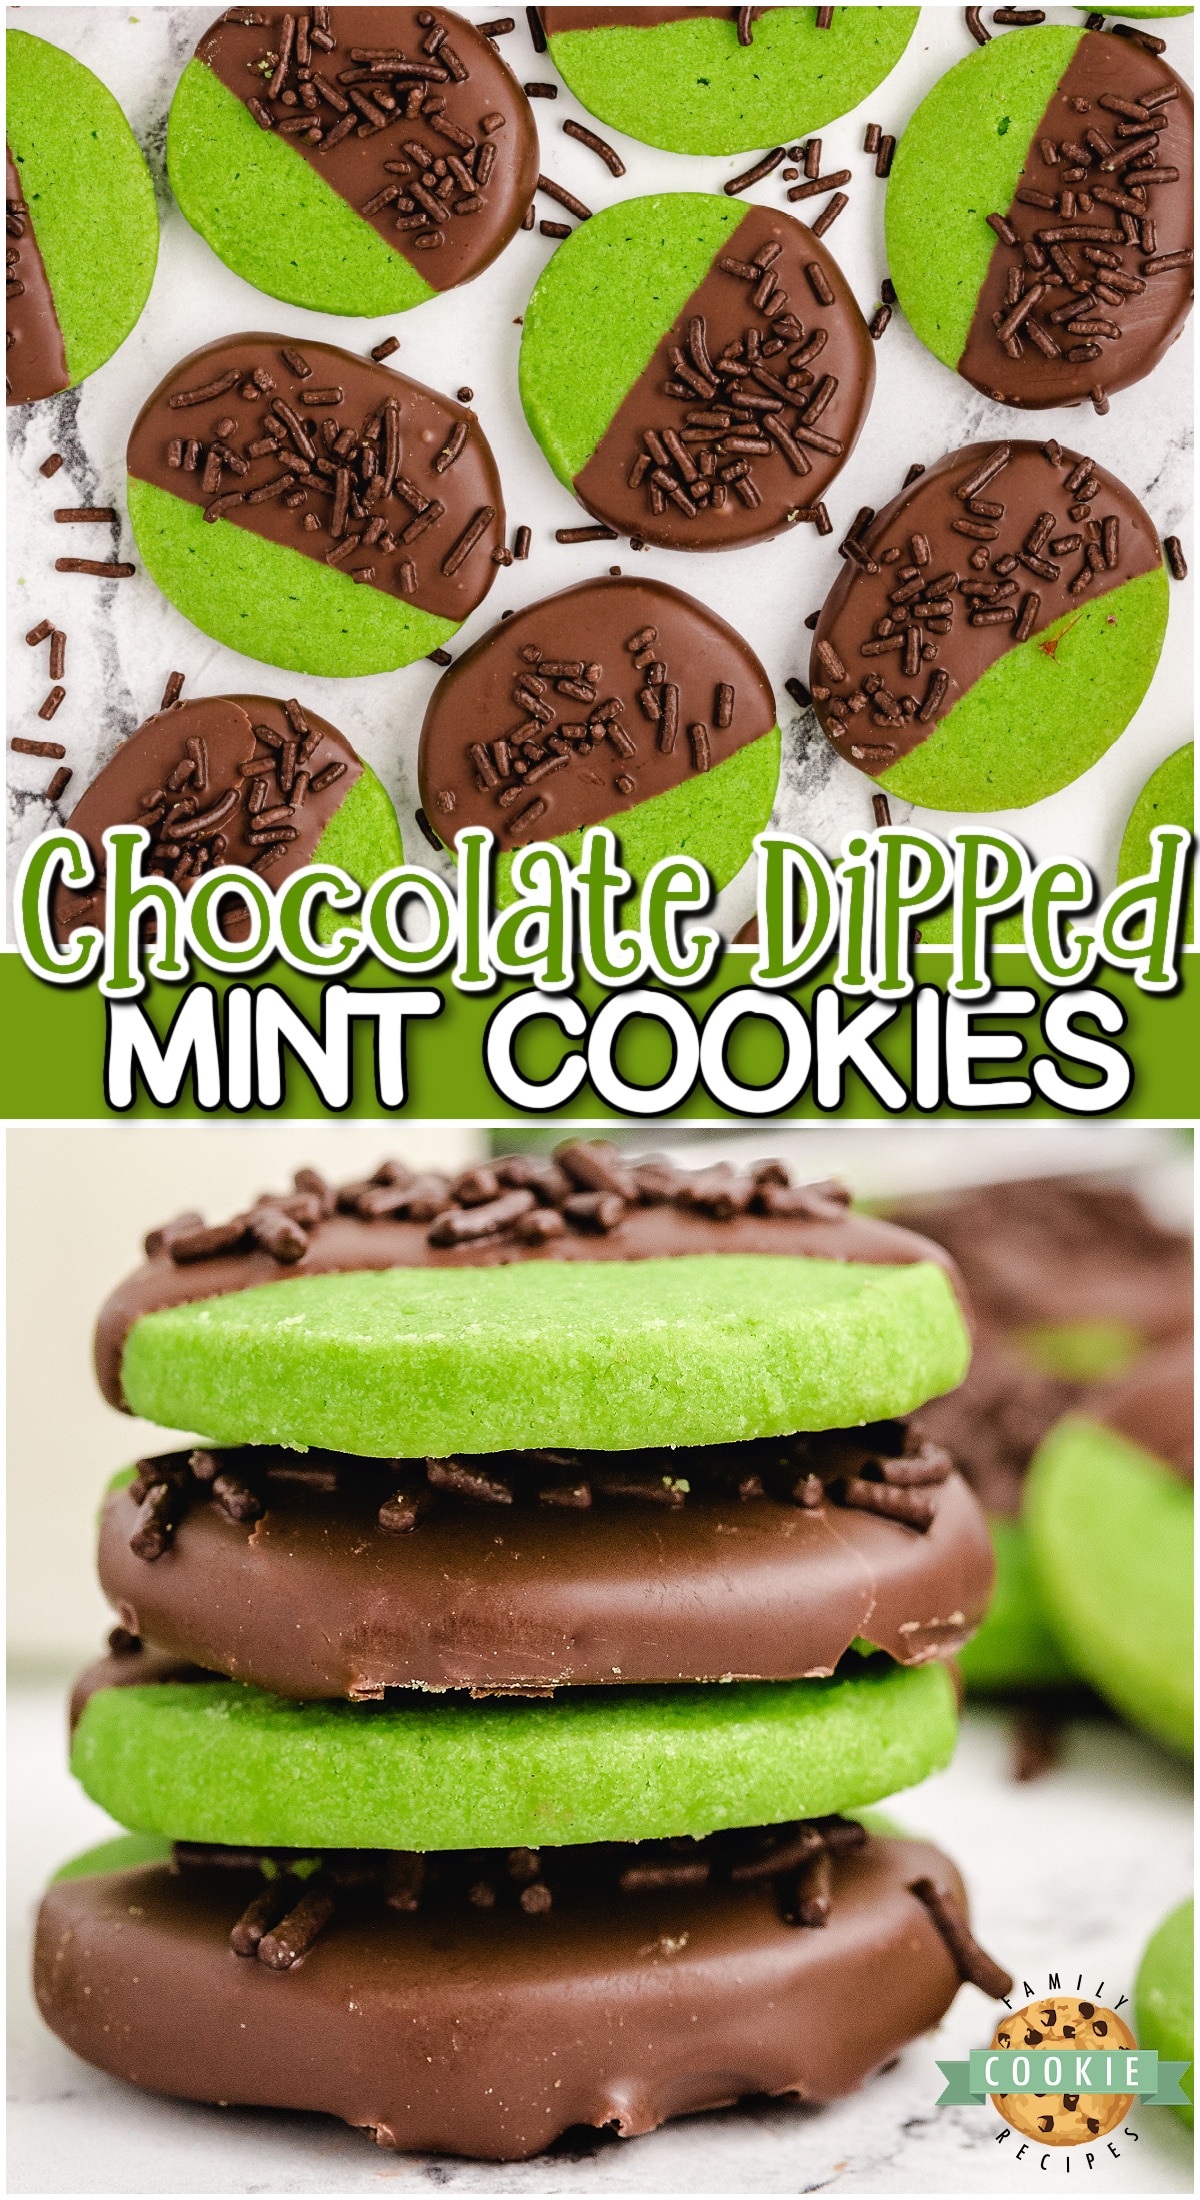 Mint Cookies made from a buttery shortbread cookie dipped in chocolate & topped with chocolate sprinkles. Green Mint Cookies perfect for St. Patrick's Day!